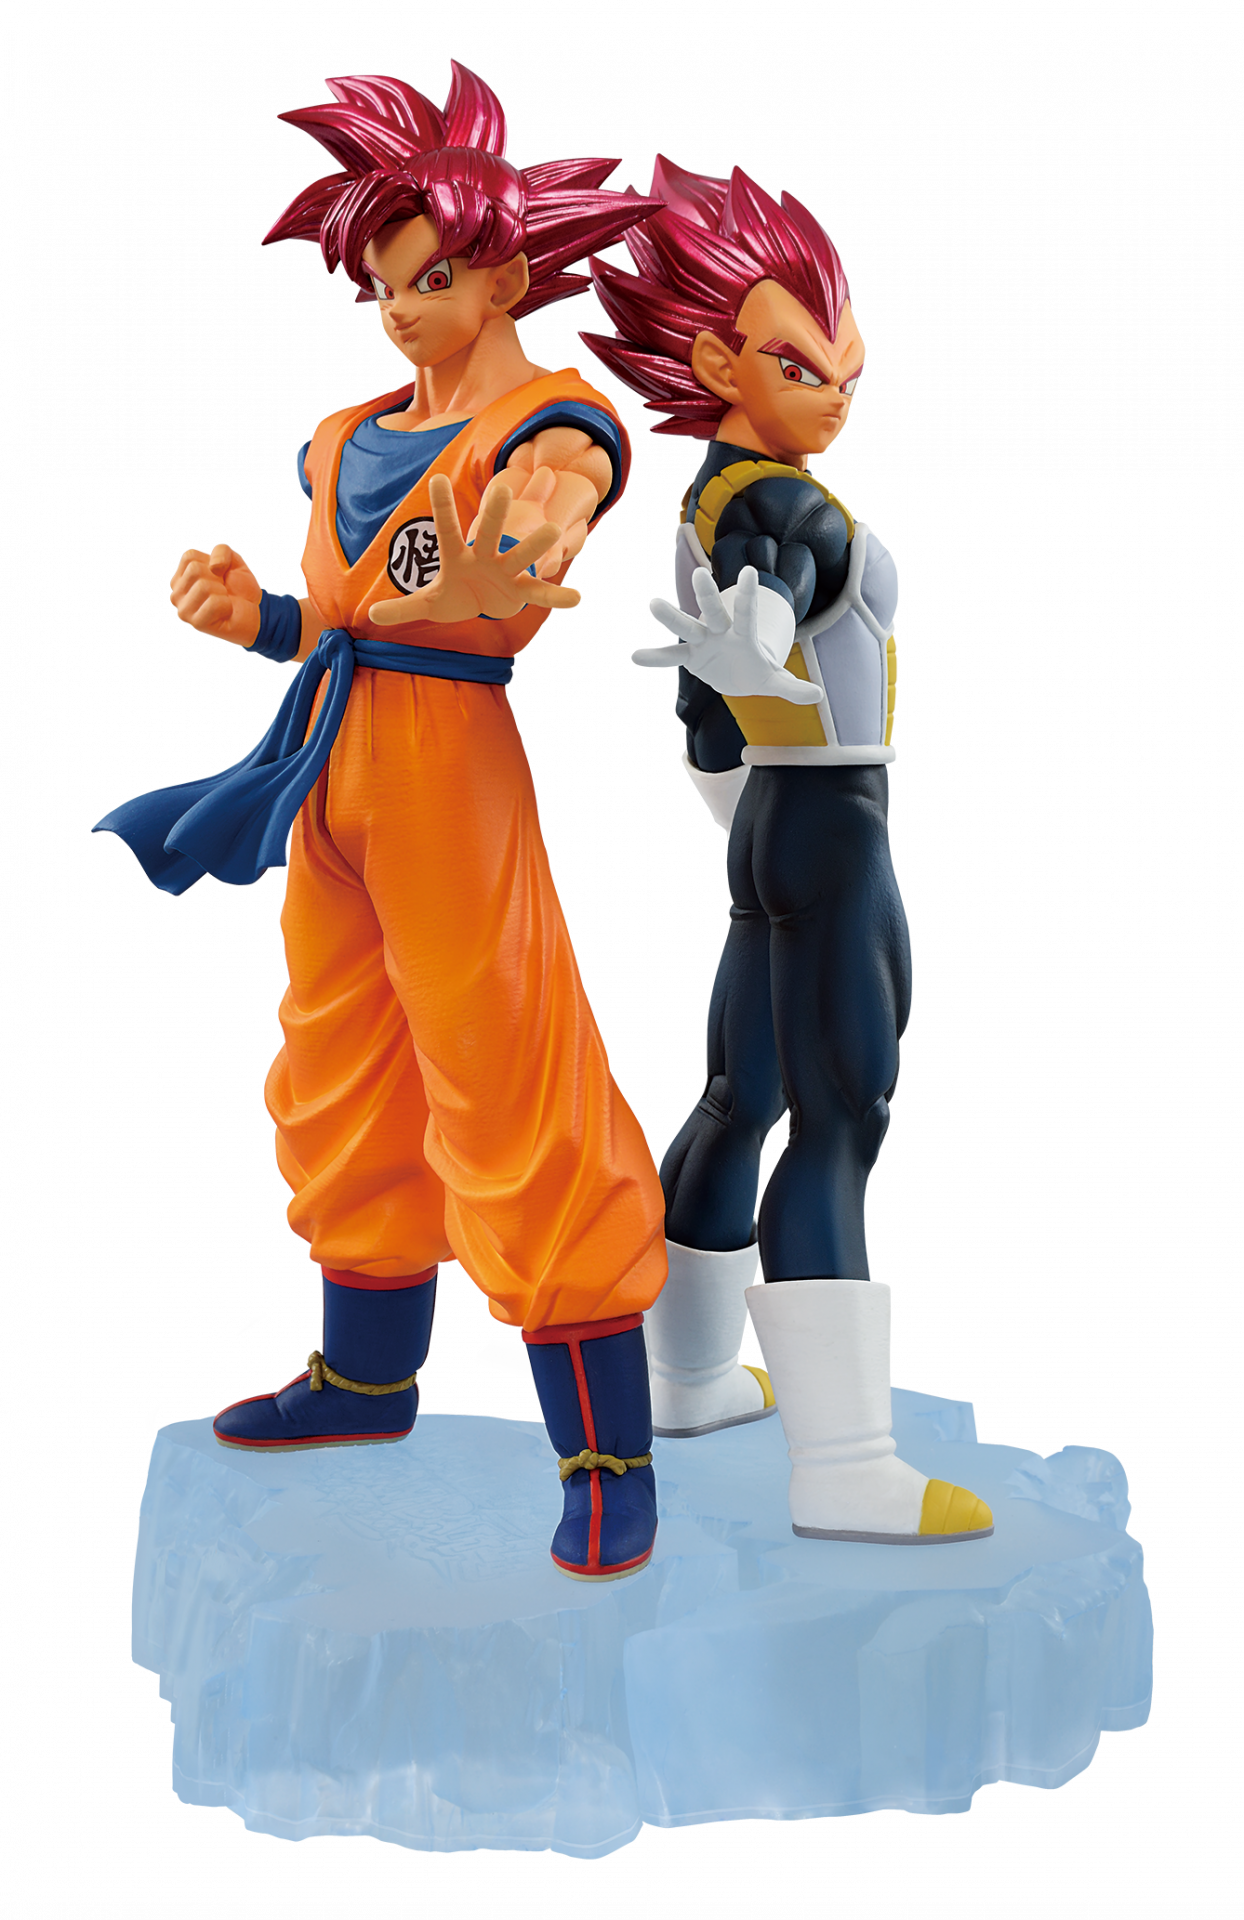 Dragon Ball Z Dokkan Battle 7th Anniversary Figures Coming to Amusement Centers!